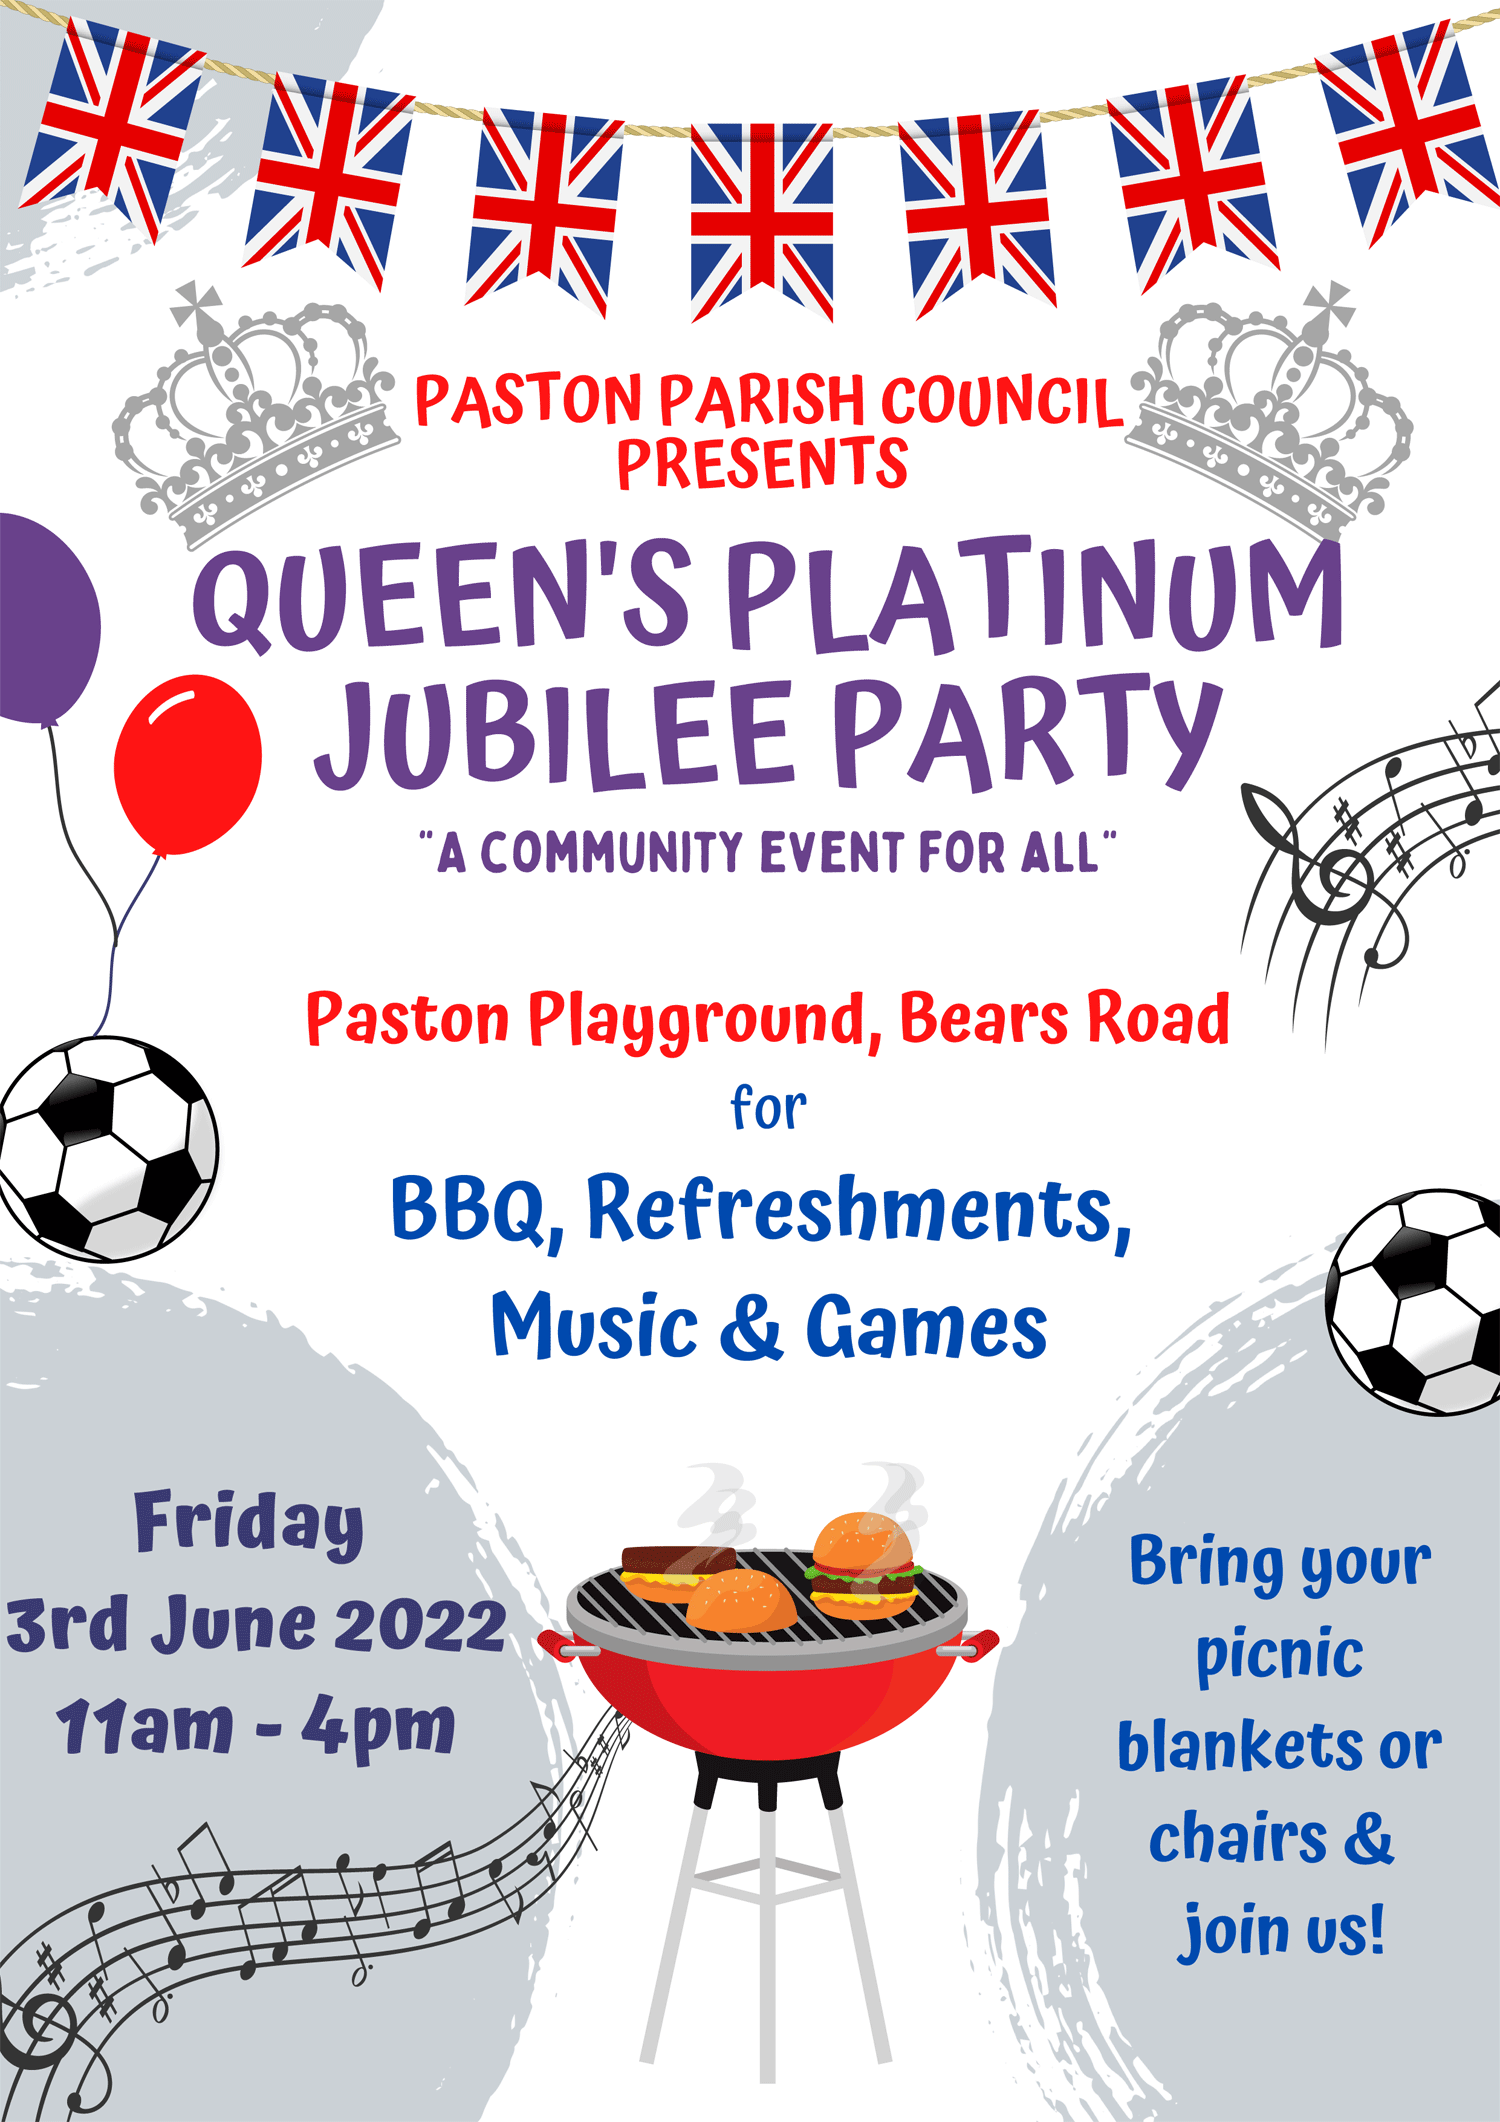 Queen's Platinum Jubilee Poster: Friday 3rd June, 11am-4pm at the Playground, Bears Road. BBQ, refreshments, music & games